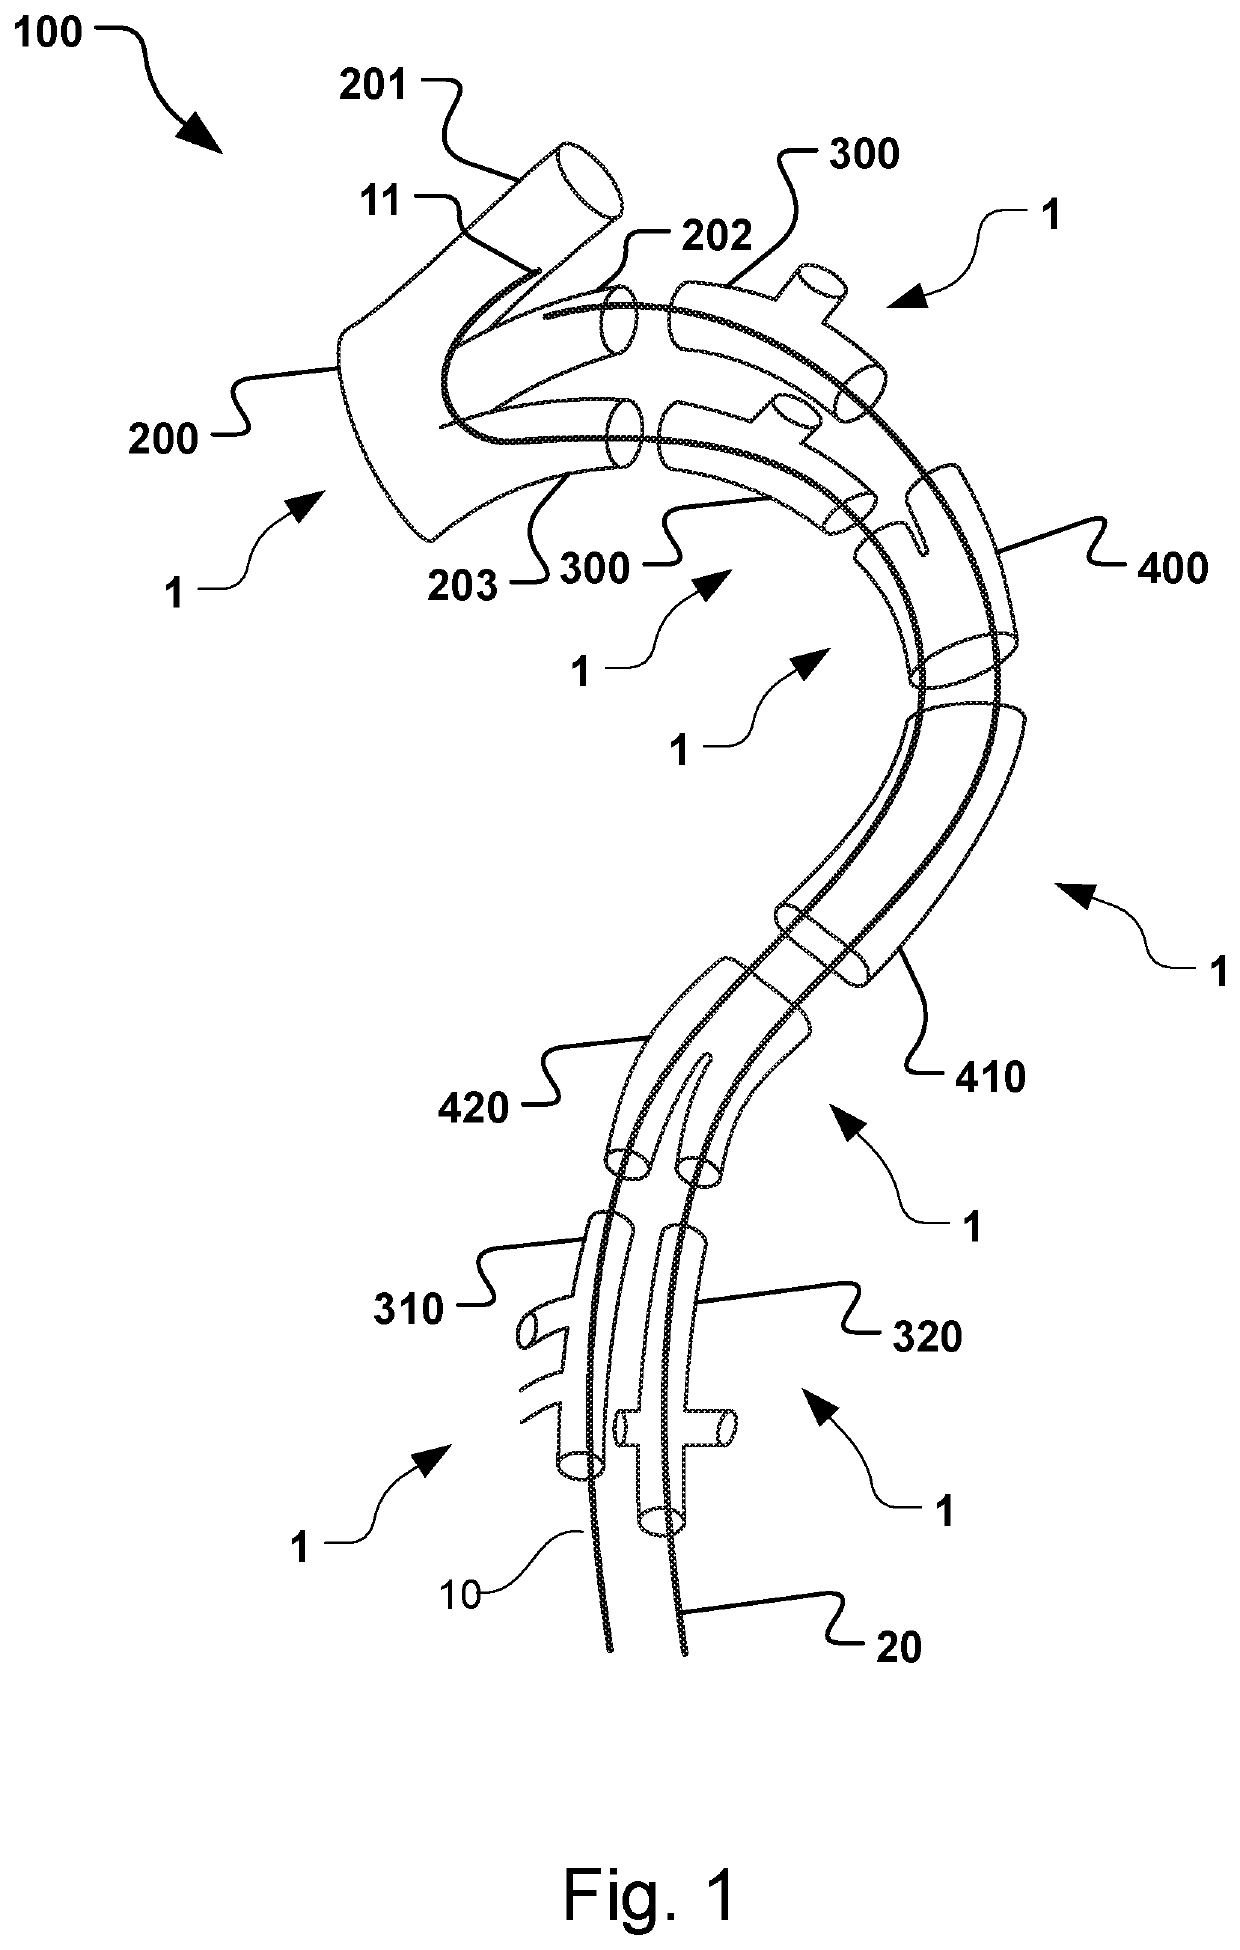 Vascular medical device, system and method